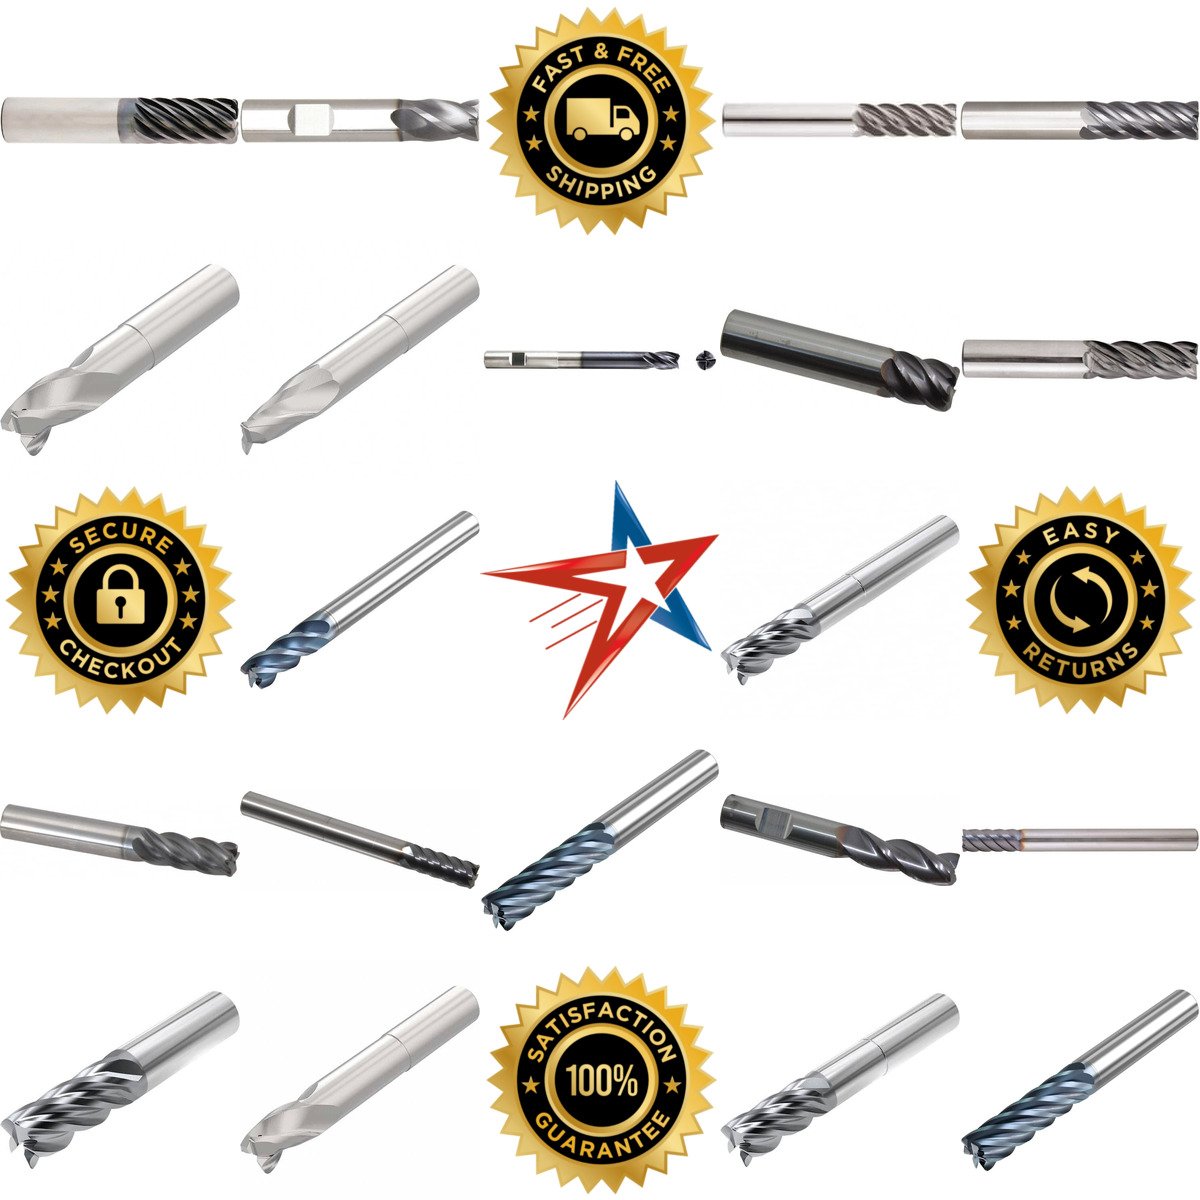 A selection of Niagara Cutter products on GoVets